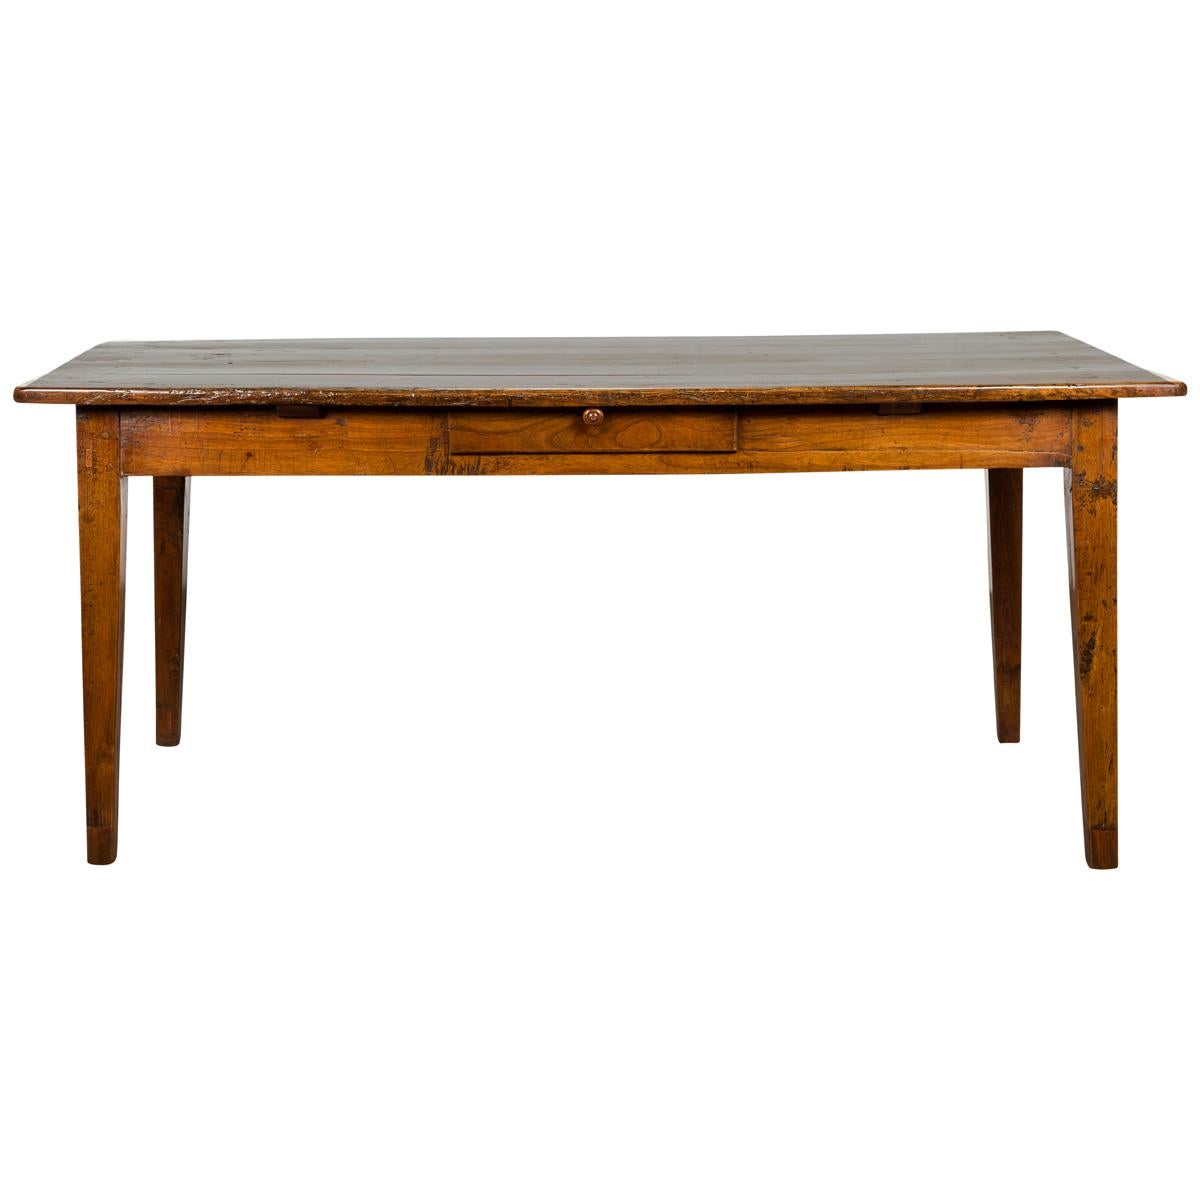 English 1870s Rustic Elm Farm Table with Single Drawer and Tapered Legs